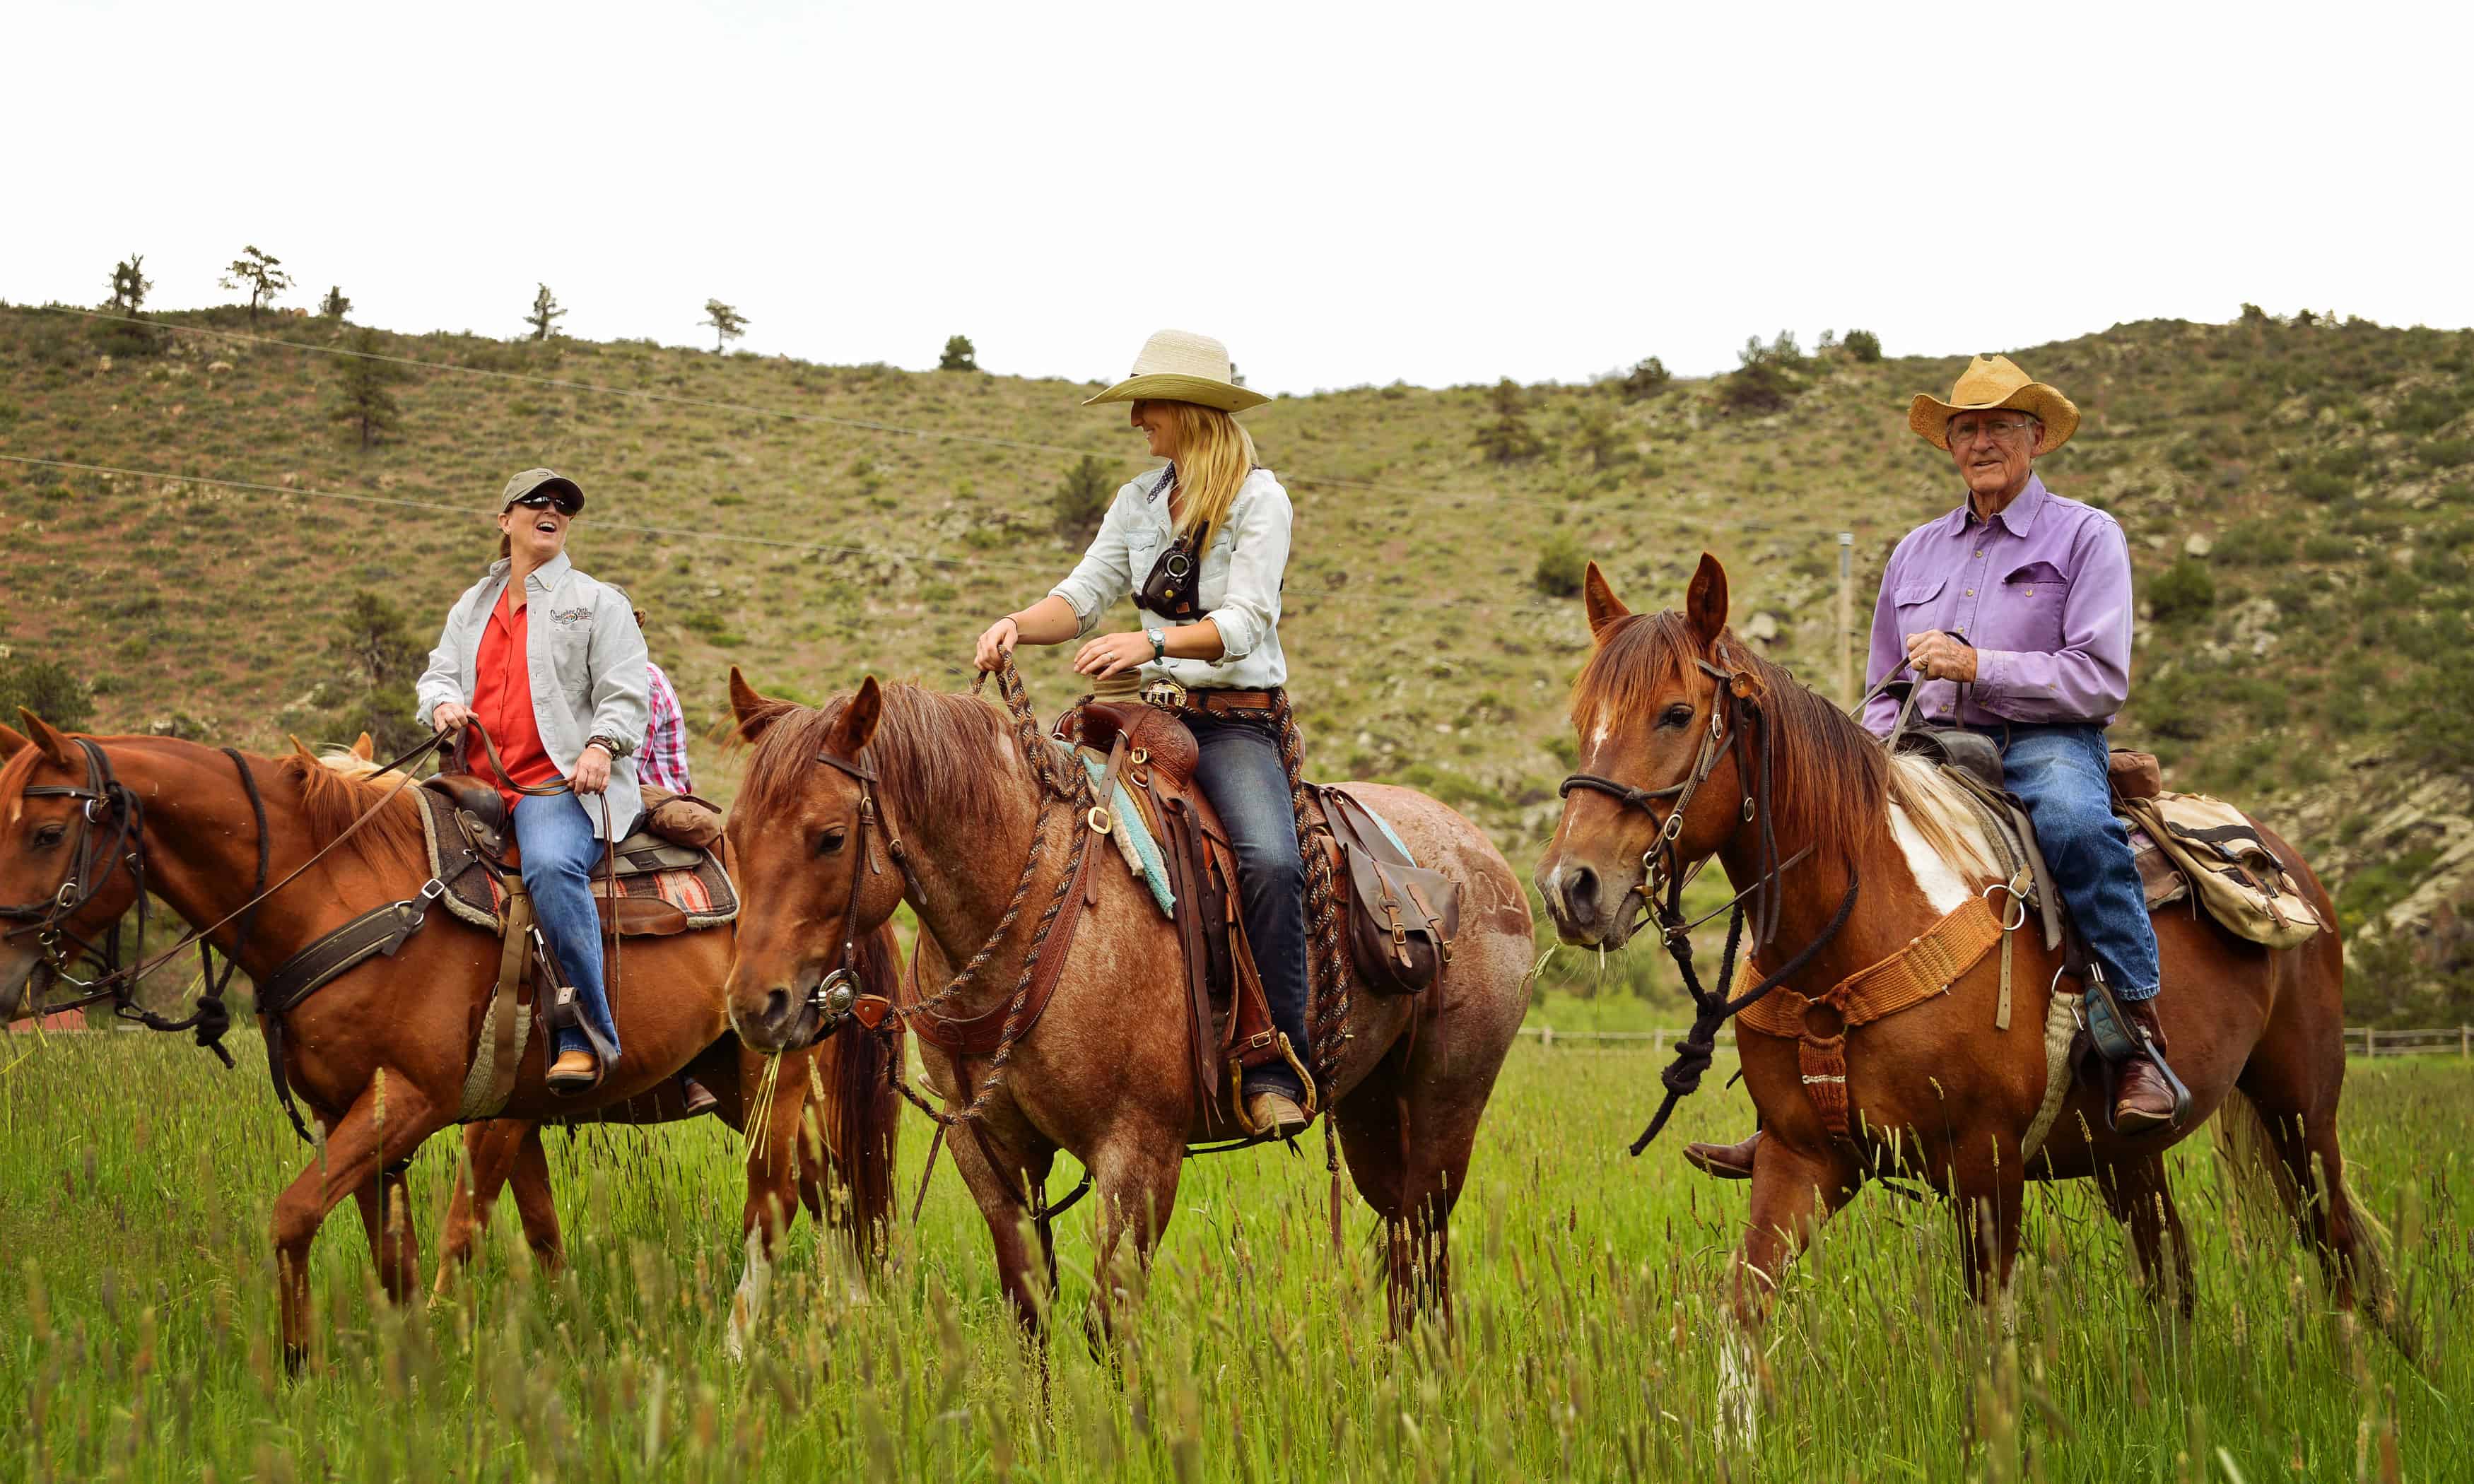 Cherokee park ranch dude ranch for cowgirl dream getawy